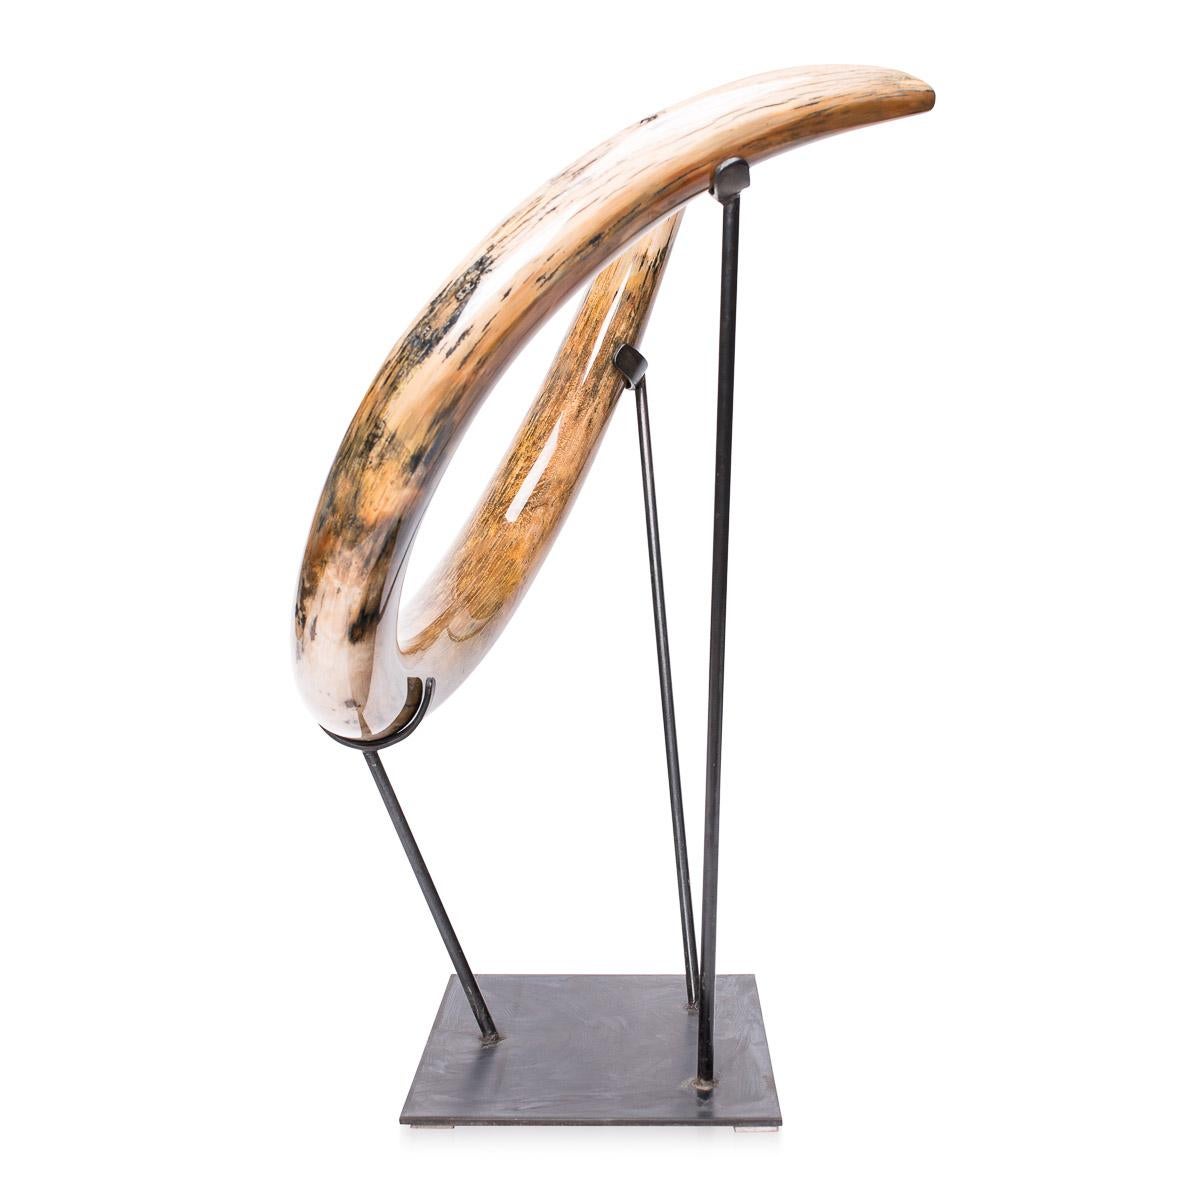 * * *Our company policy is not to ship any taxidermy items to the USA. We apologise from any inconvenience this may cause. * * *

Top quality Siberian woolly mammoth tusk (Mammuthus primigenius) in immaculate condition. This tusk was recovered from